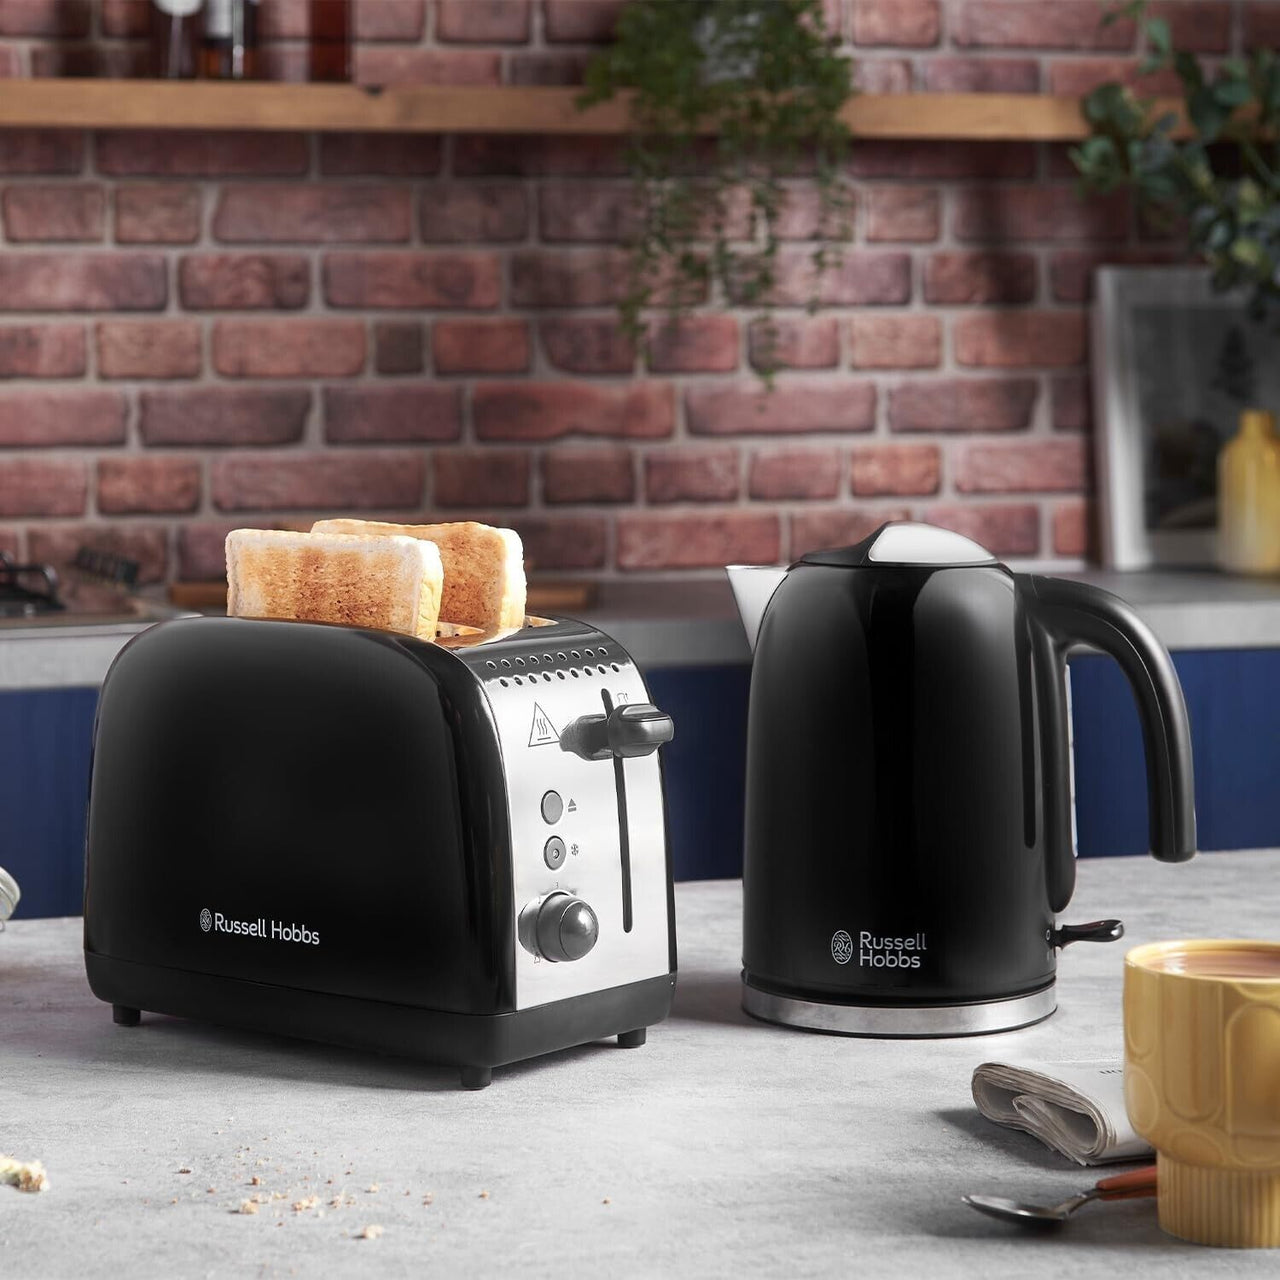 Russell Hobbs Colours Plus Black 1.7L Kettle & 2 Slice Toaster Matching Set